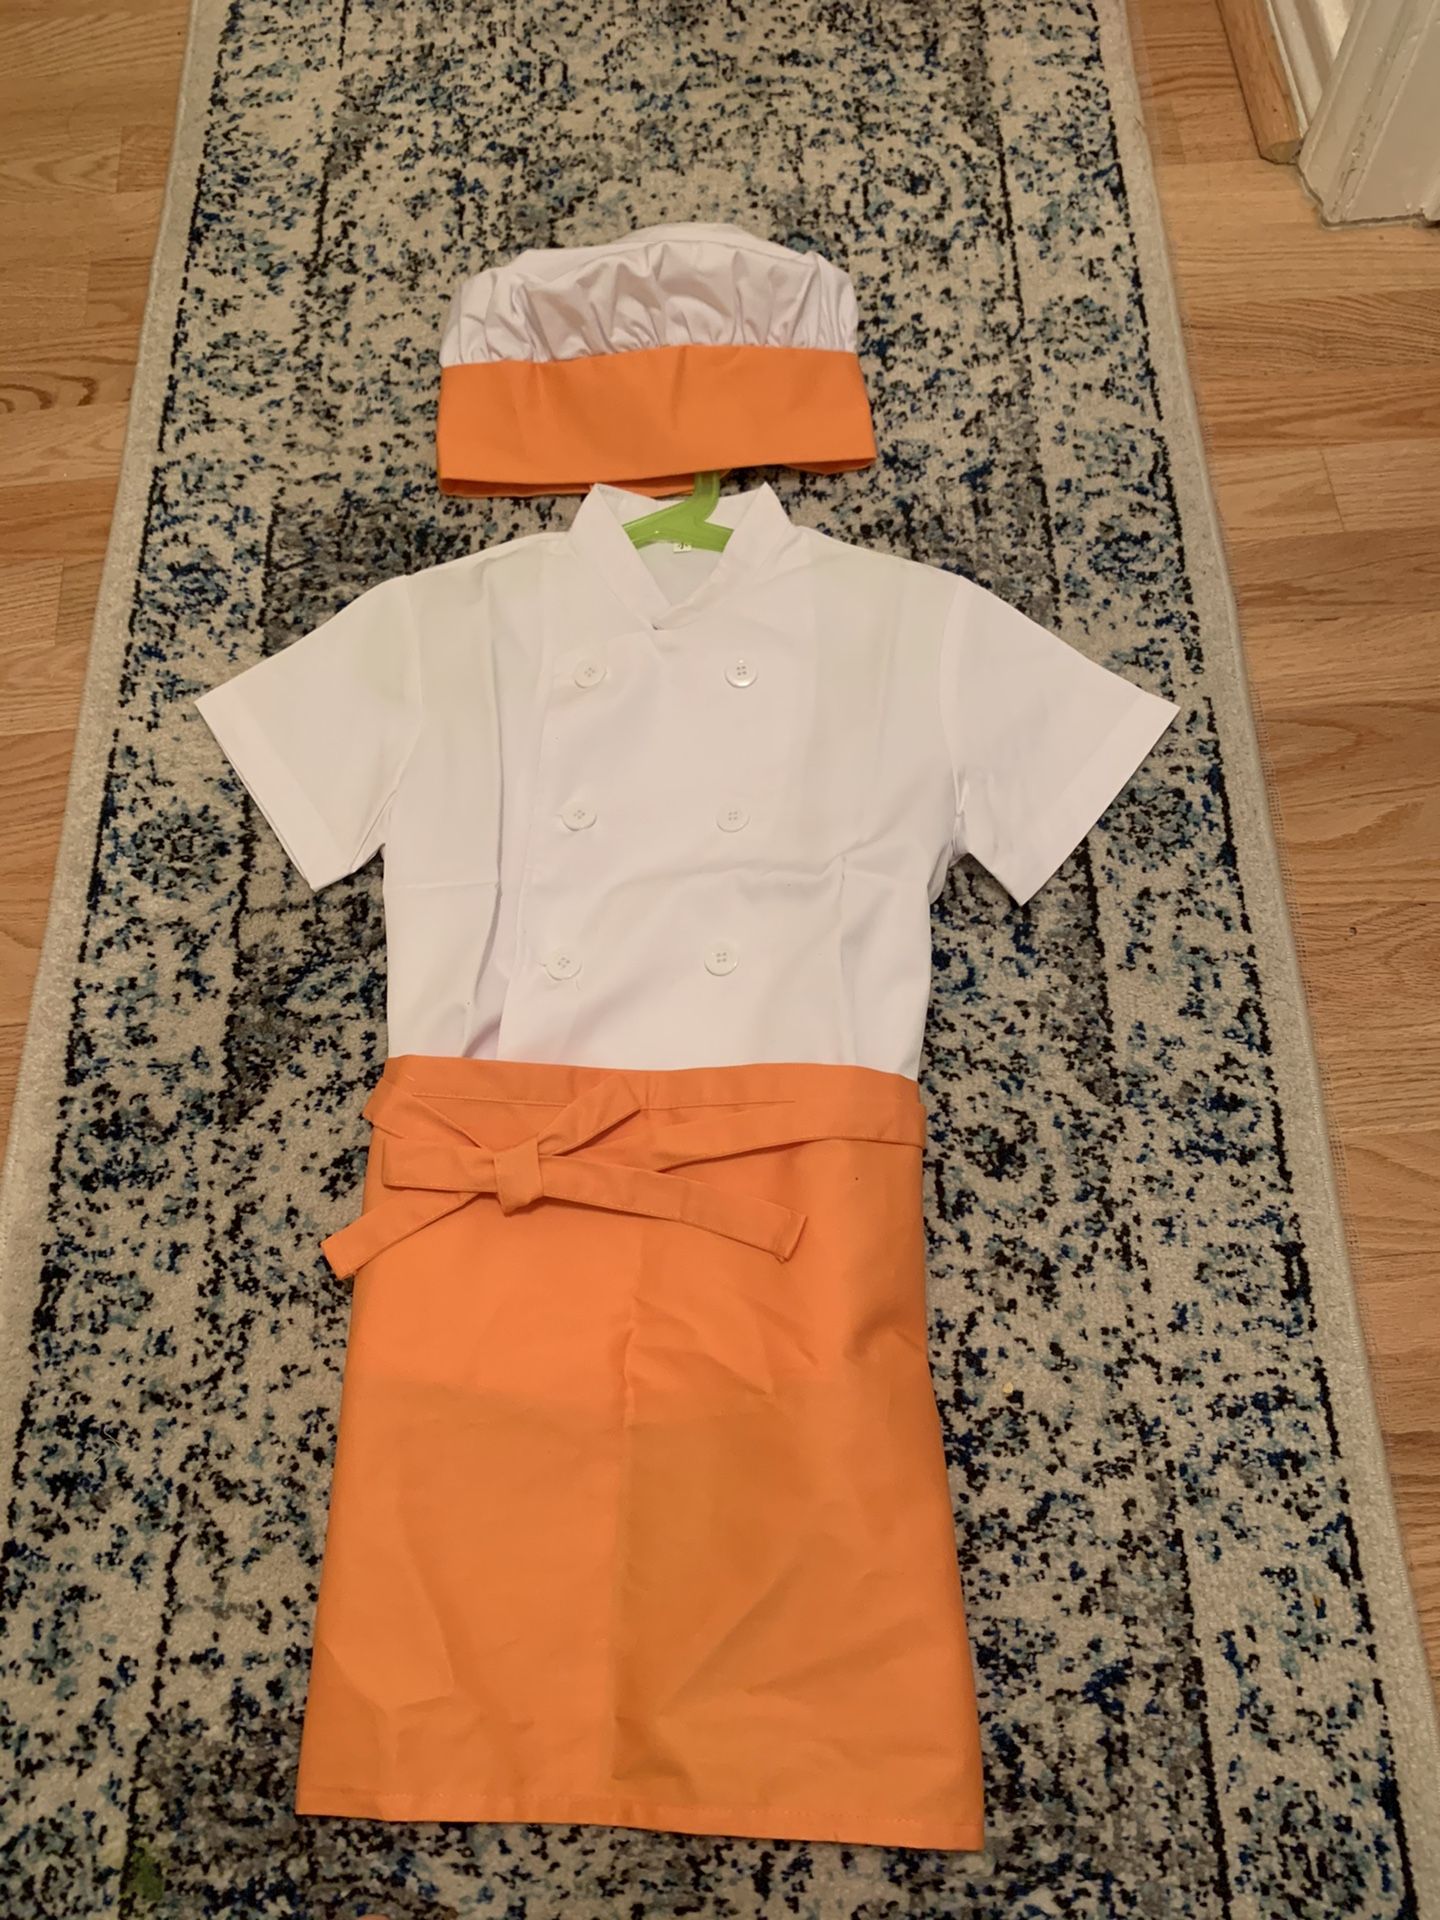 Chefs clothes for kids all new from korea 1 for 20 or 11 for 200 dollars